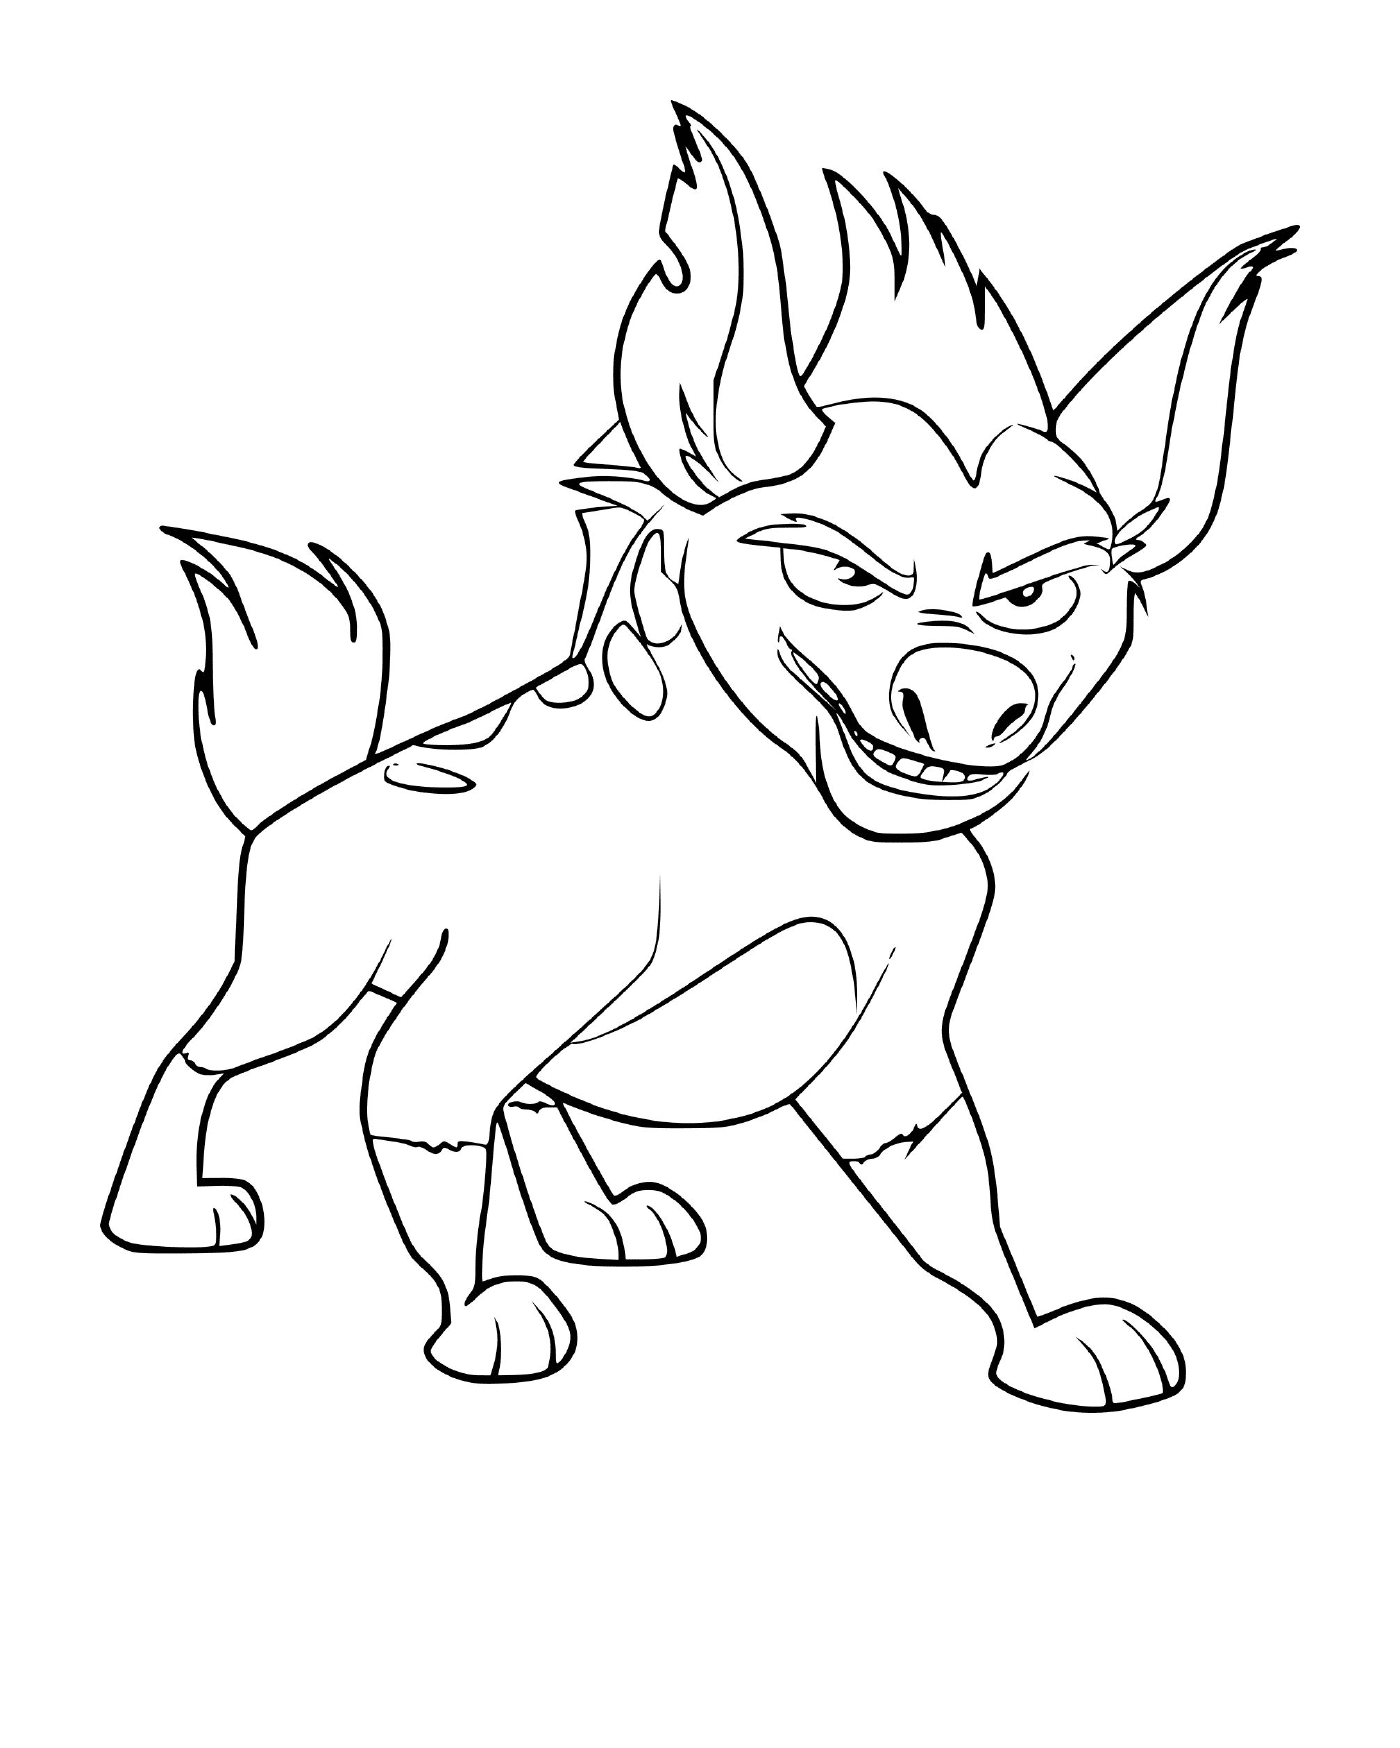  Banzai, character of the Lion King, with an angry face 